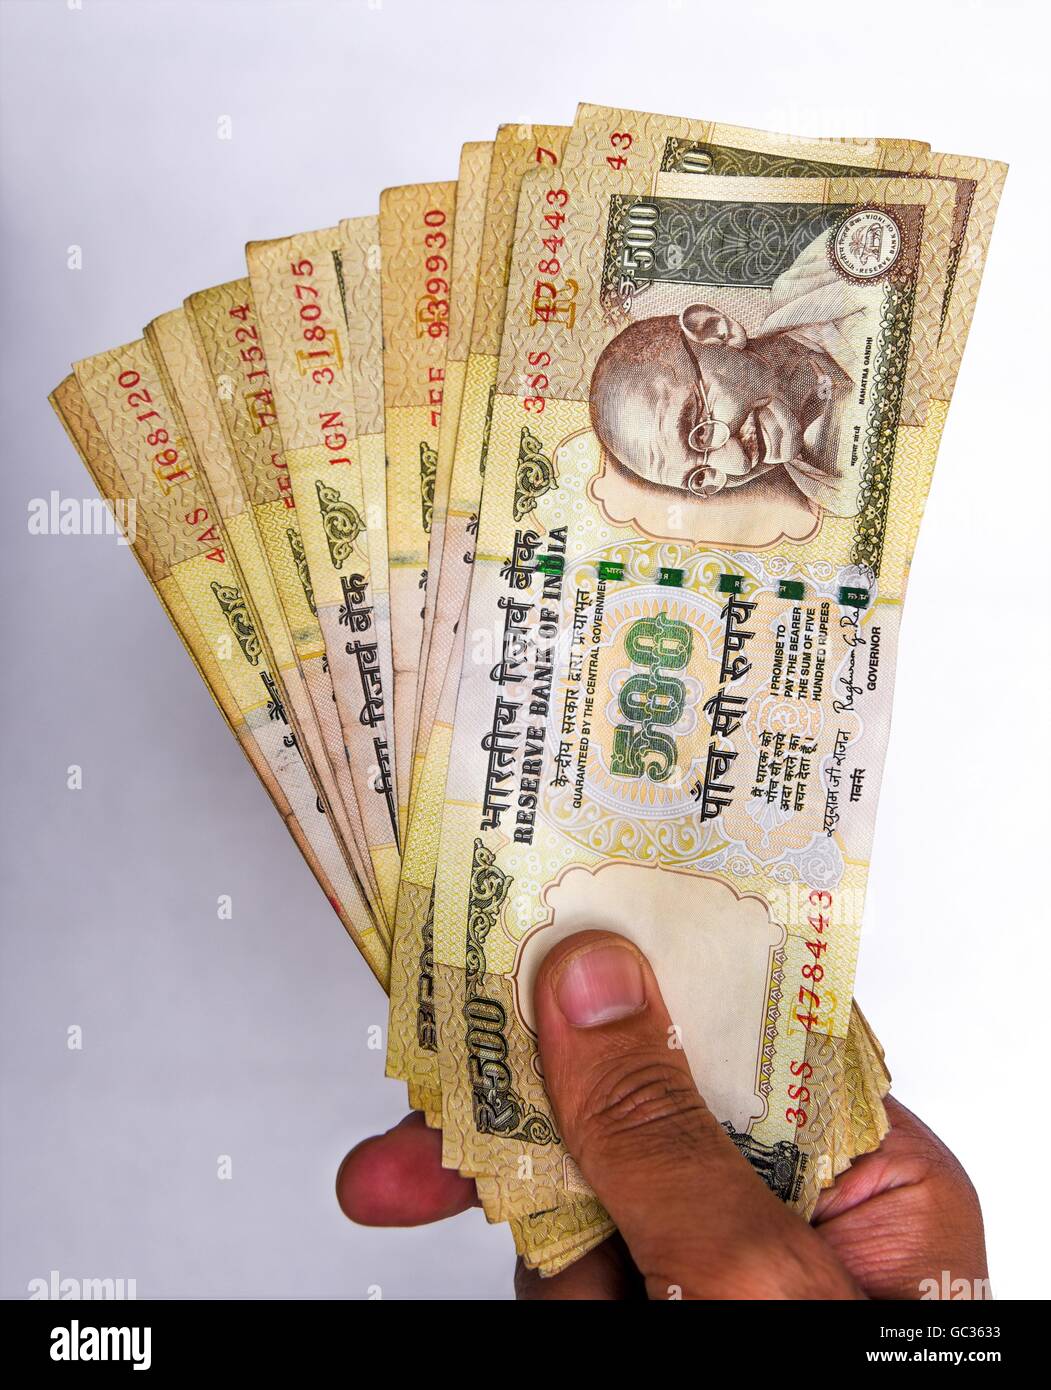 Indian currency notes of rupees 500 value Stock Photo